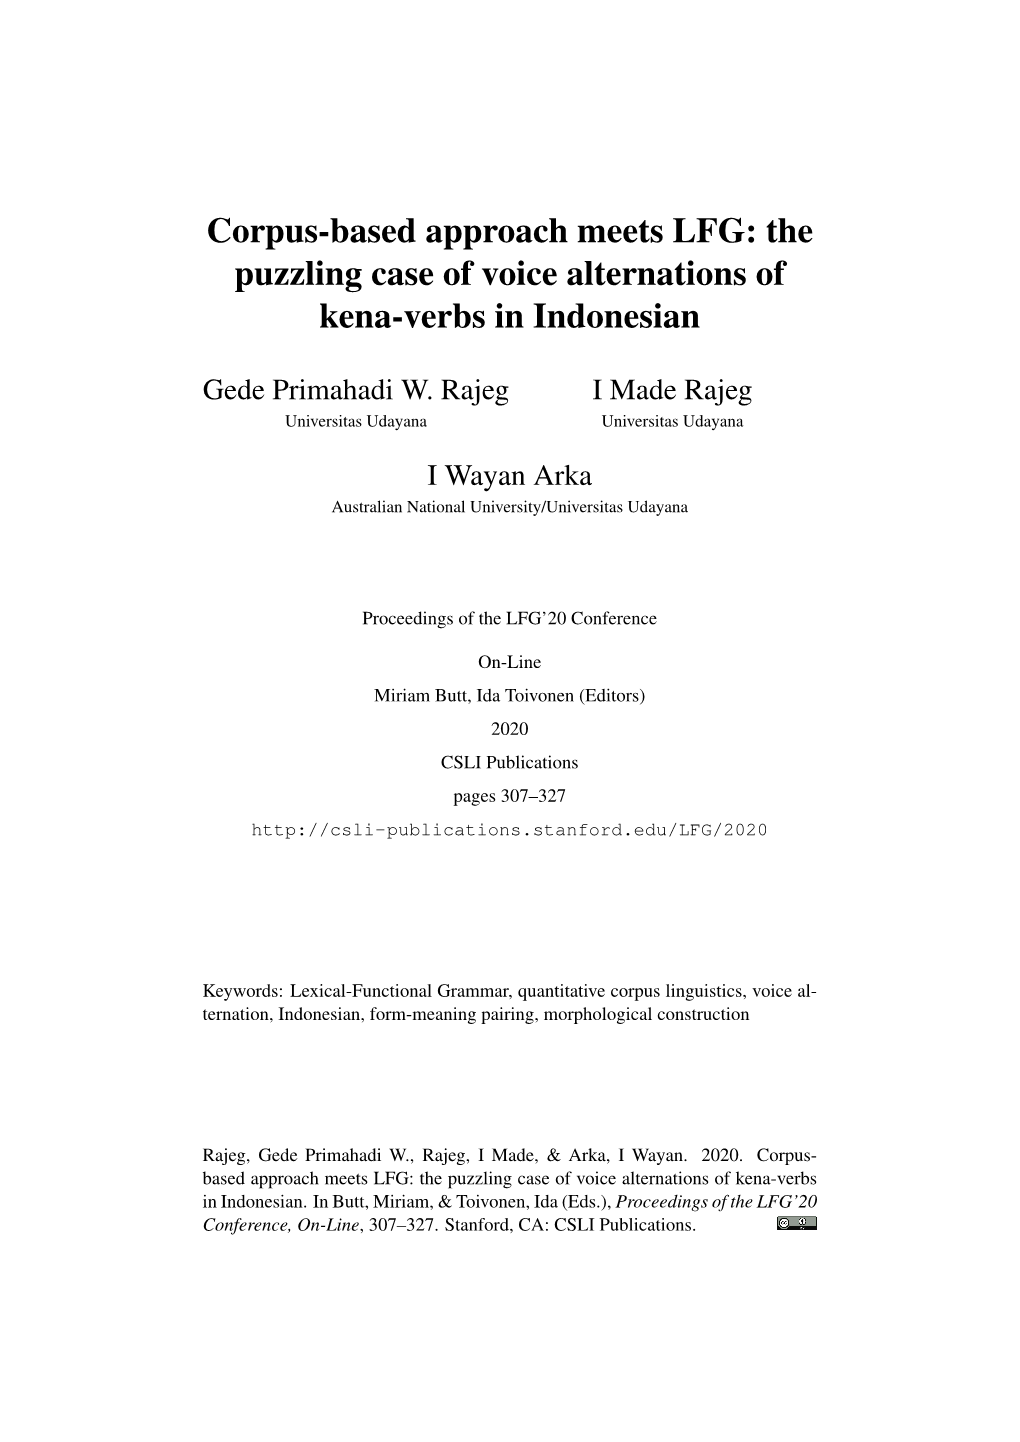 Corpus-Based Approach Meets LFG: the Puzzling Case of Voice Alternations of Kena-Verbs in Indonesian